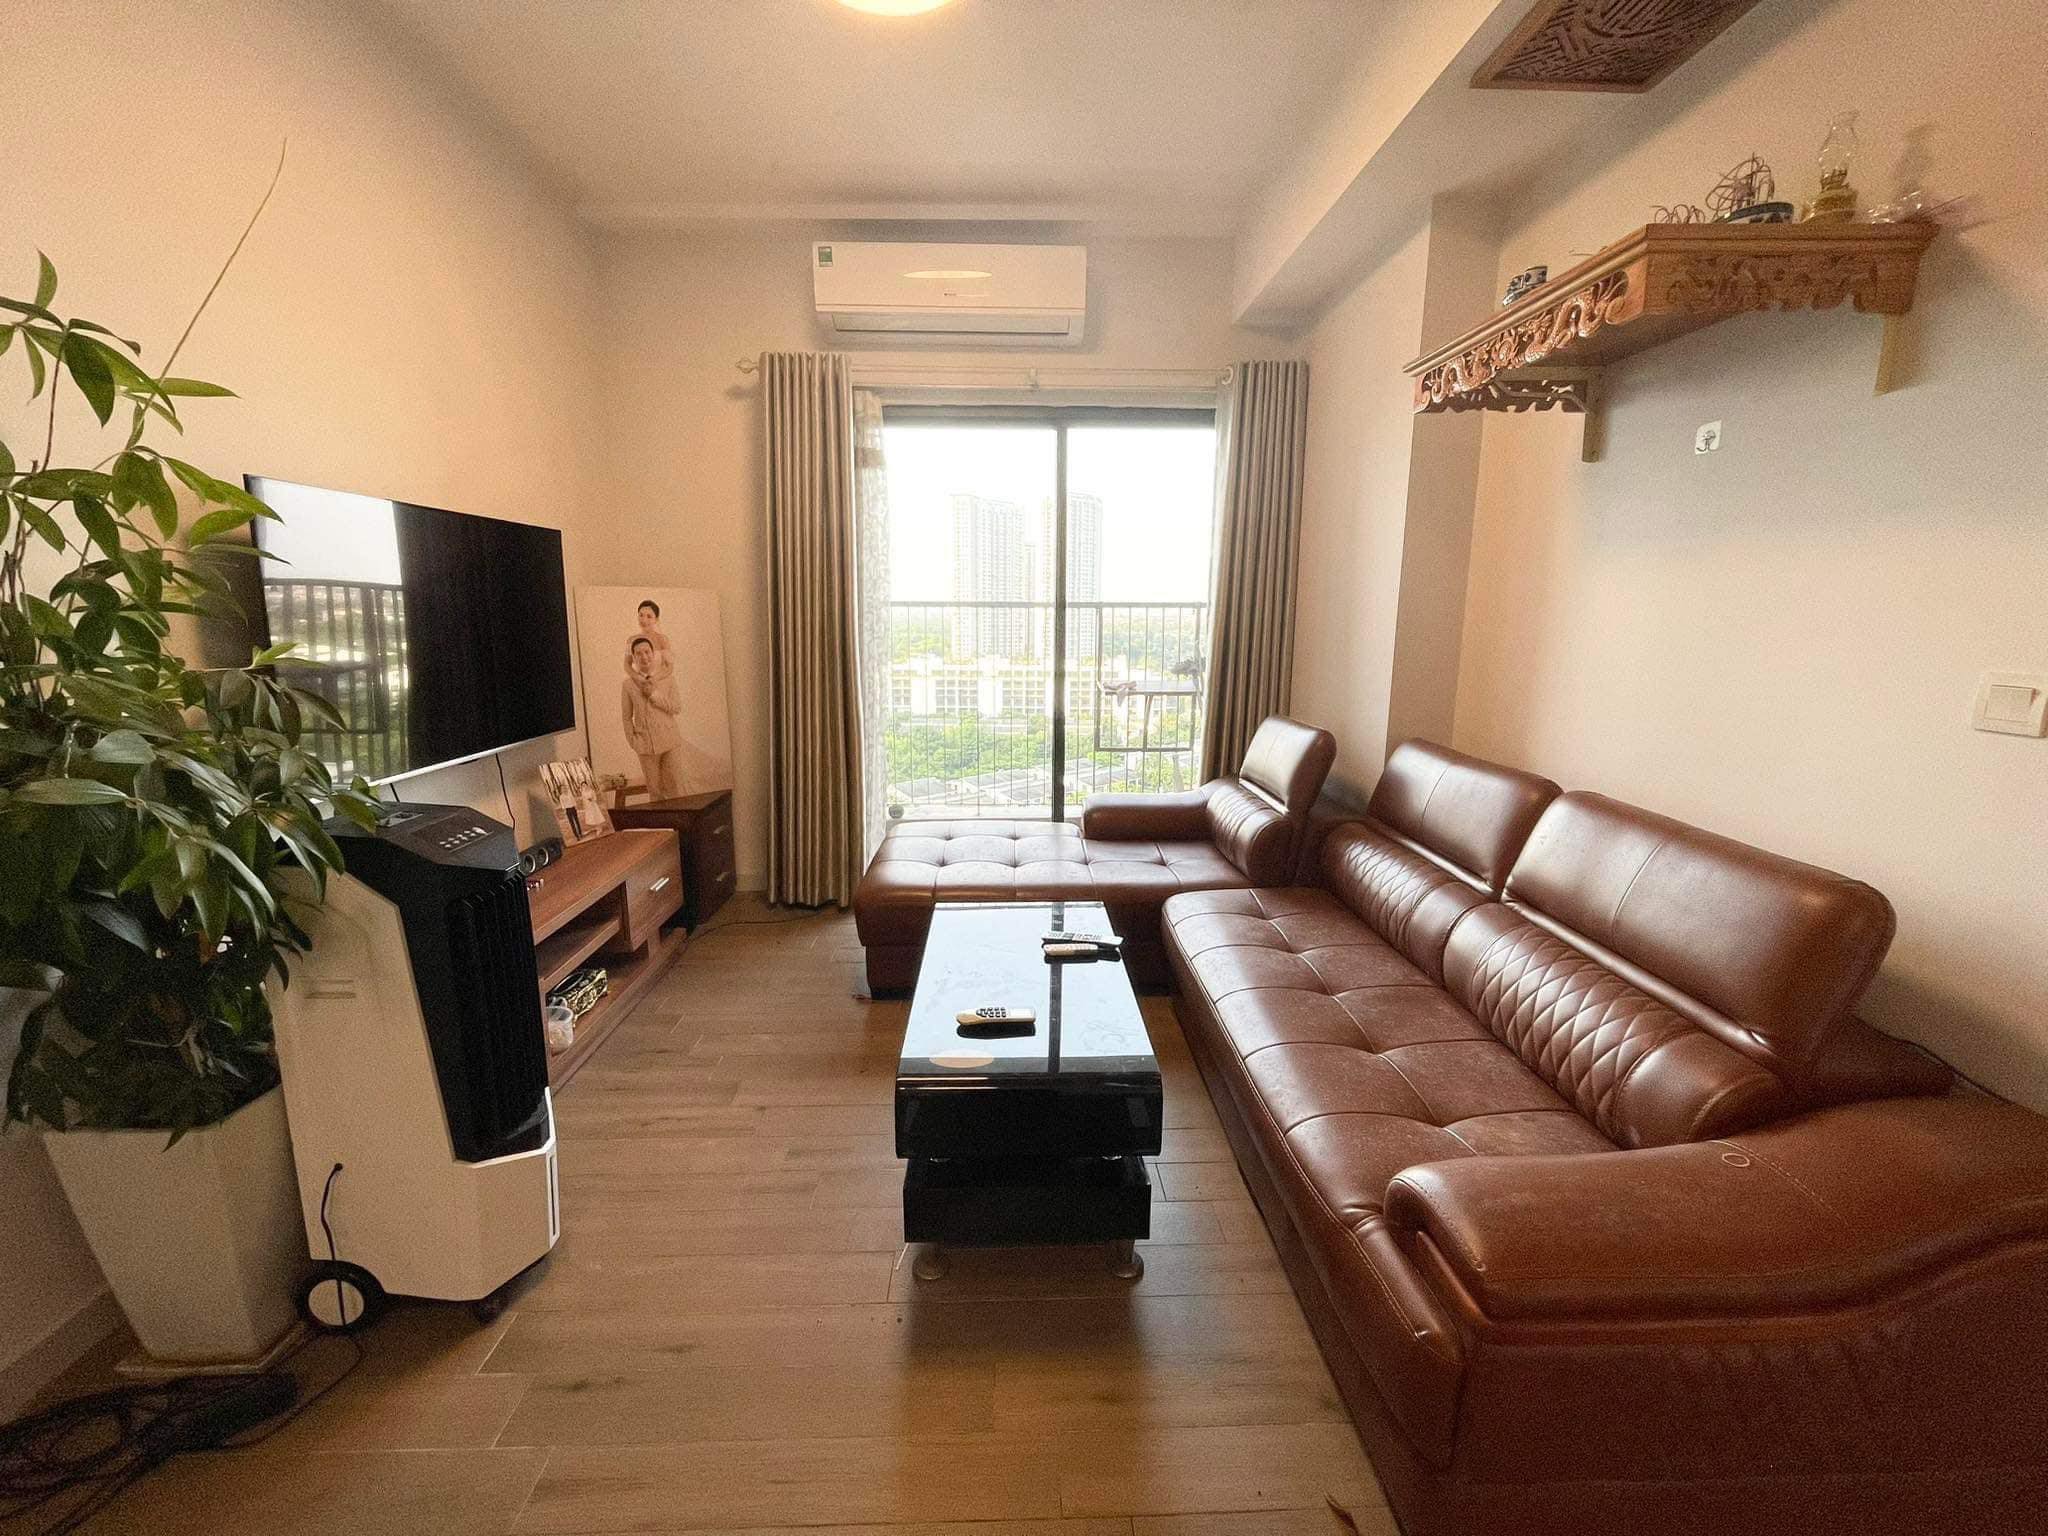 3 bedrooms rental apartment in D tower , Westbay 1